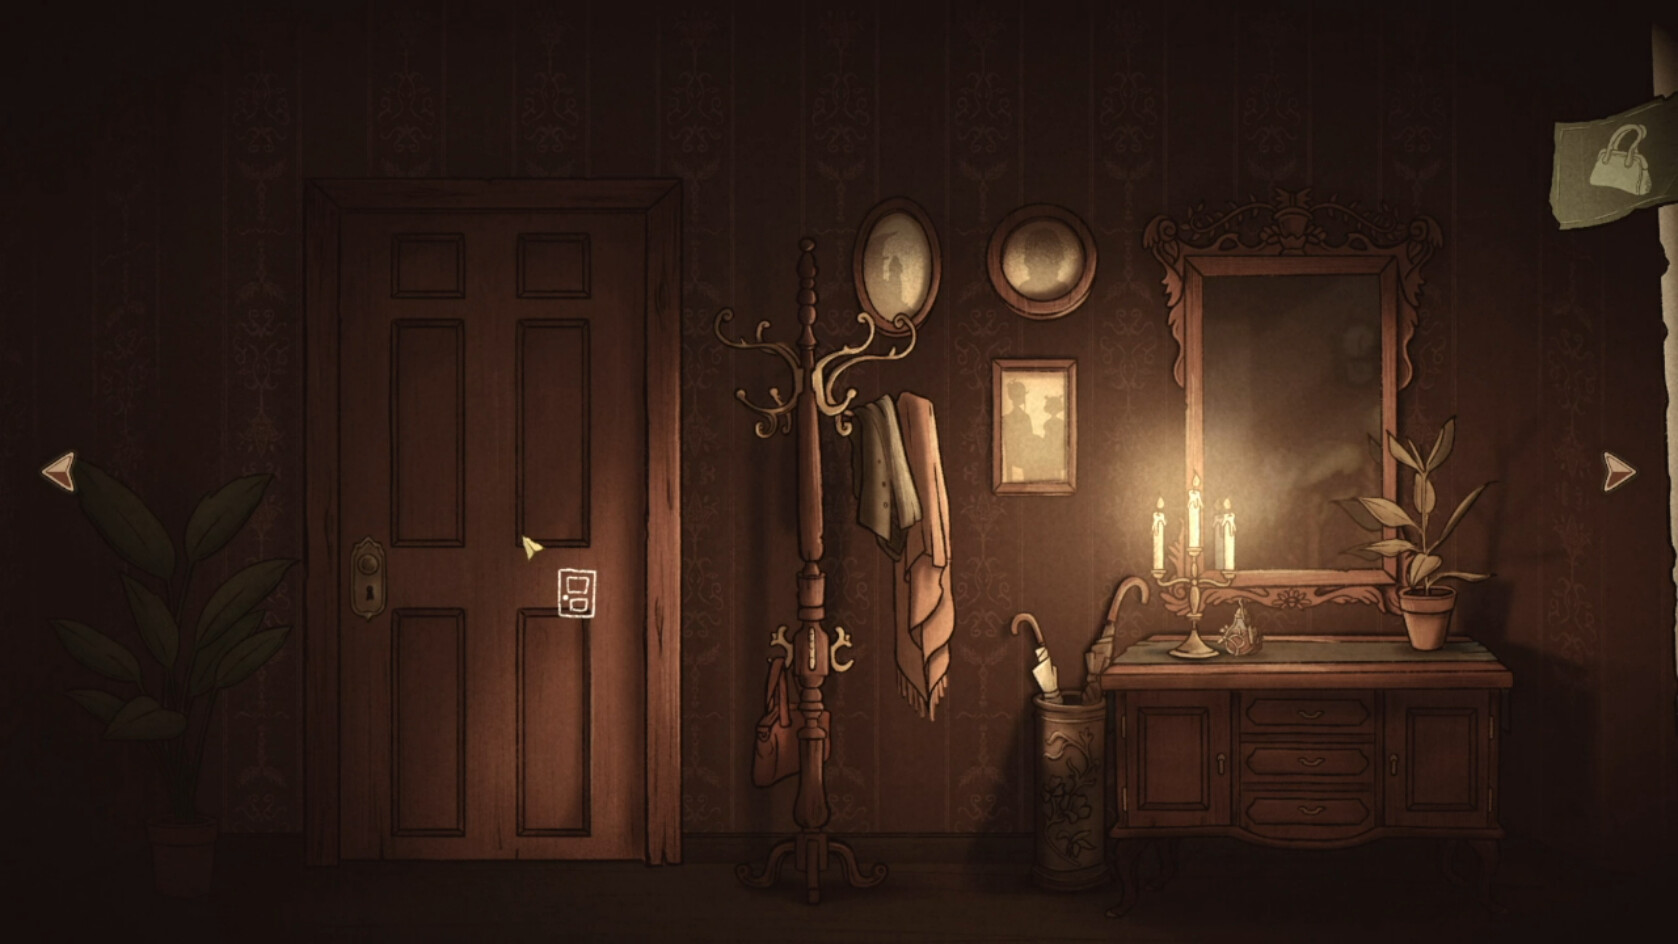 Tales from Candleforth promises a lot of nostalgia and horror